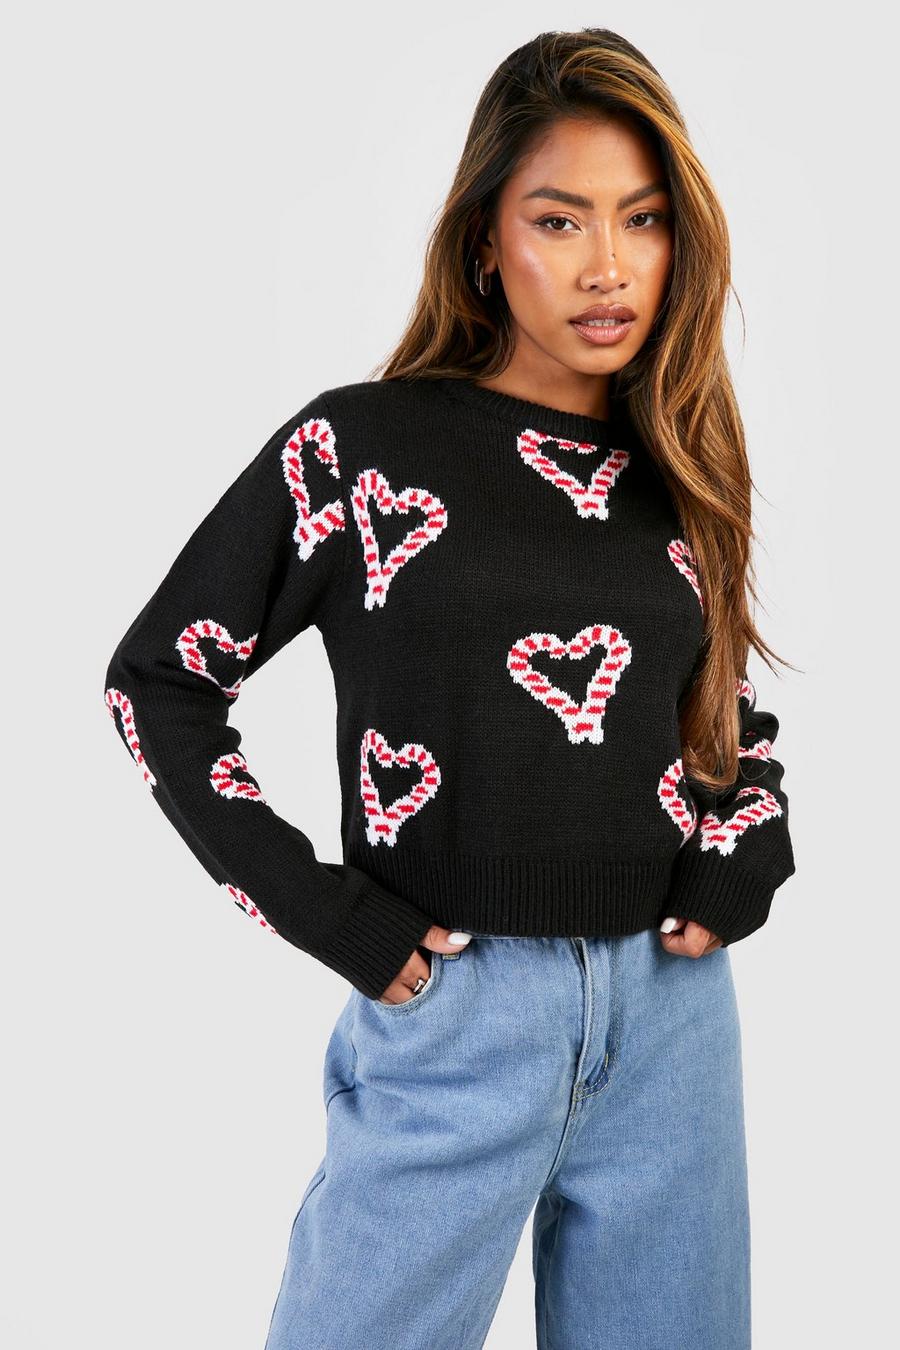 Black Heart Candy Cane Crop Christmas Sweater